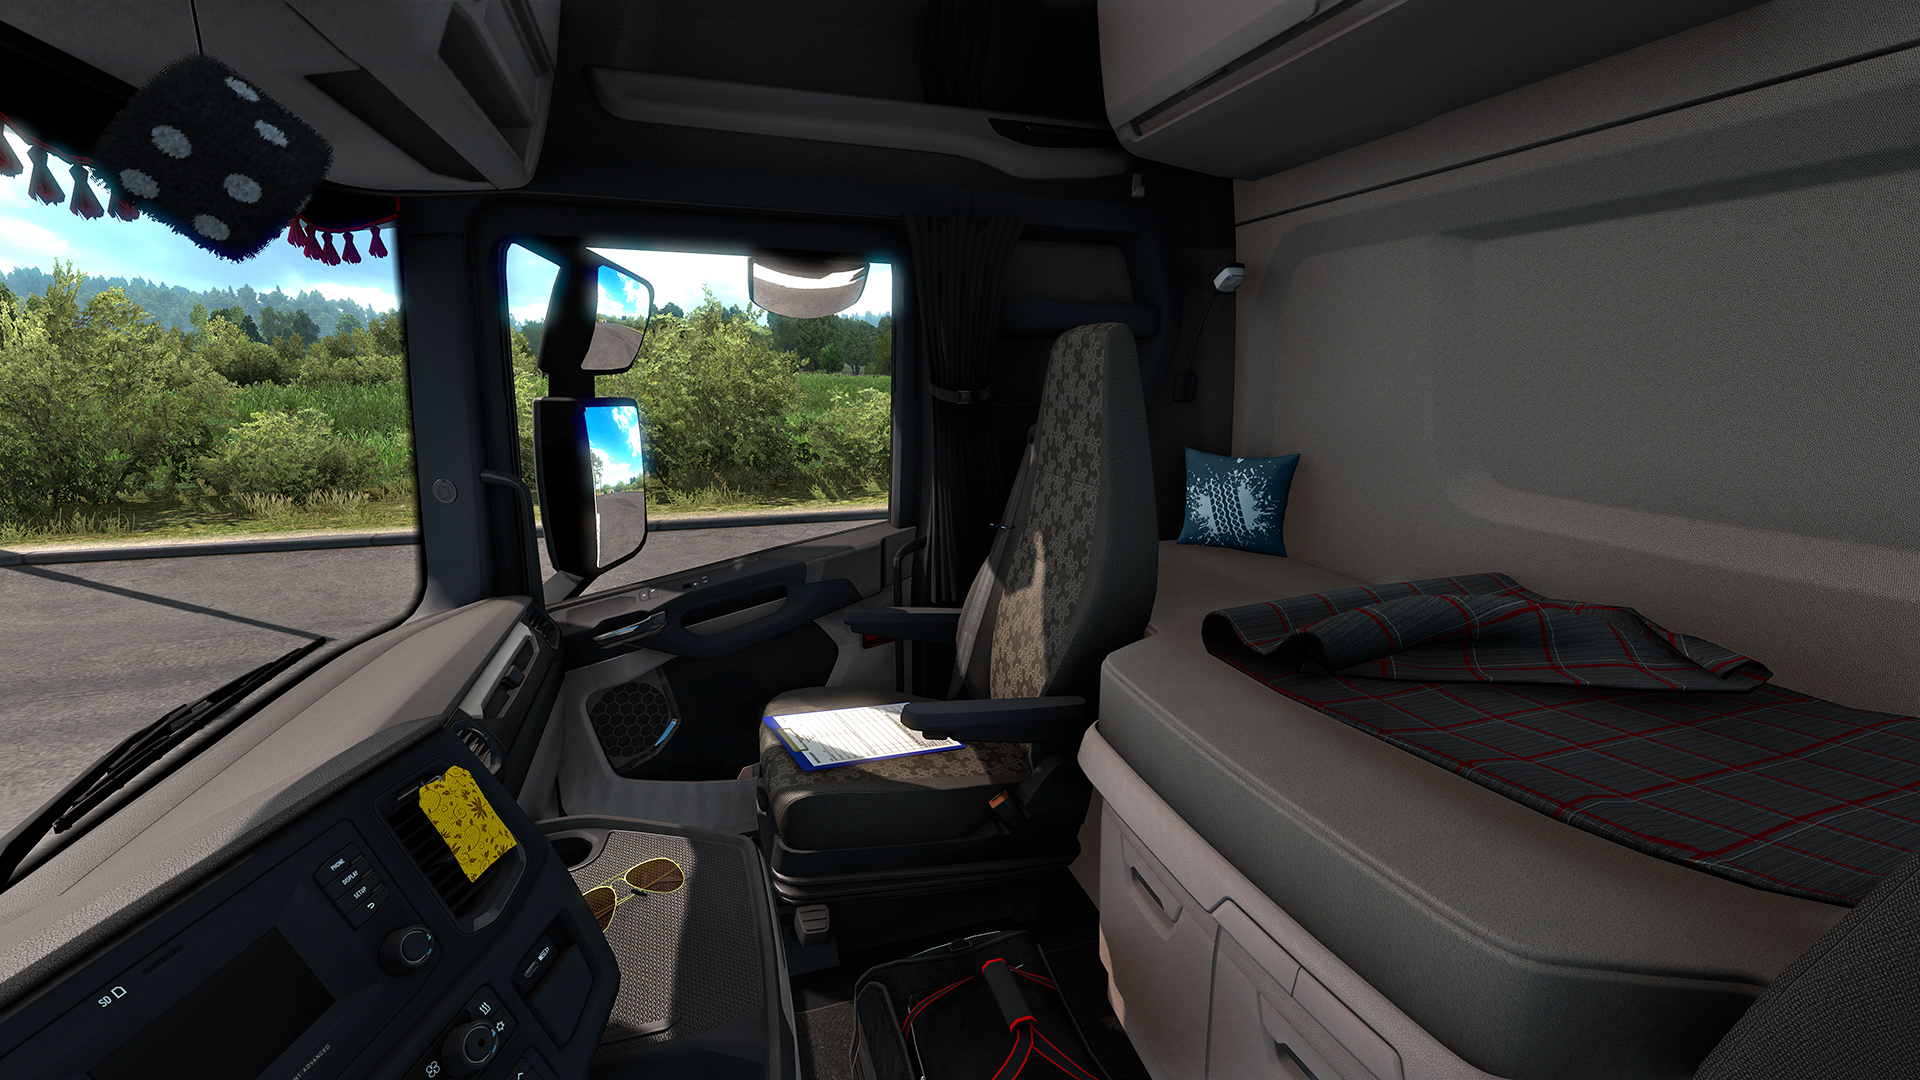 ETS 2 receives free update for cabin accessories DLC